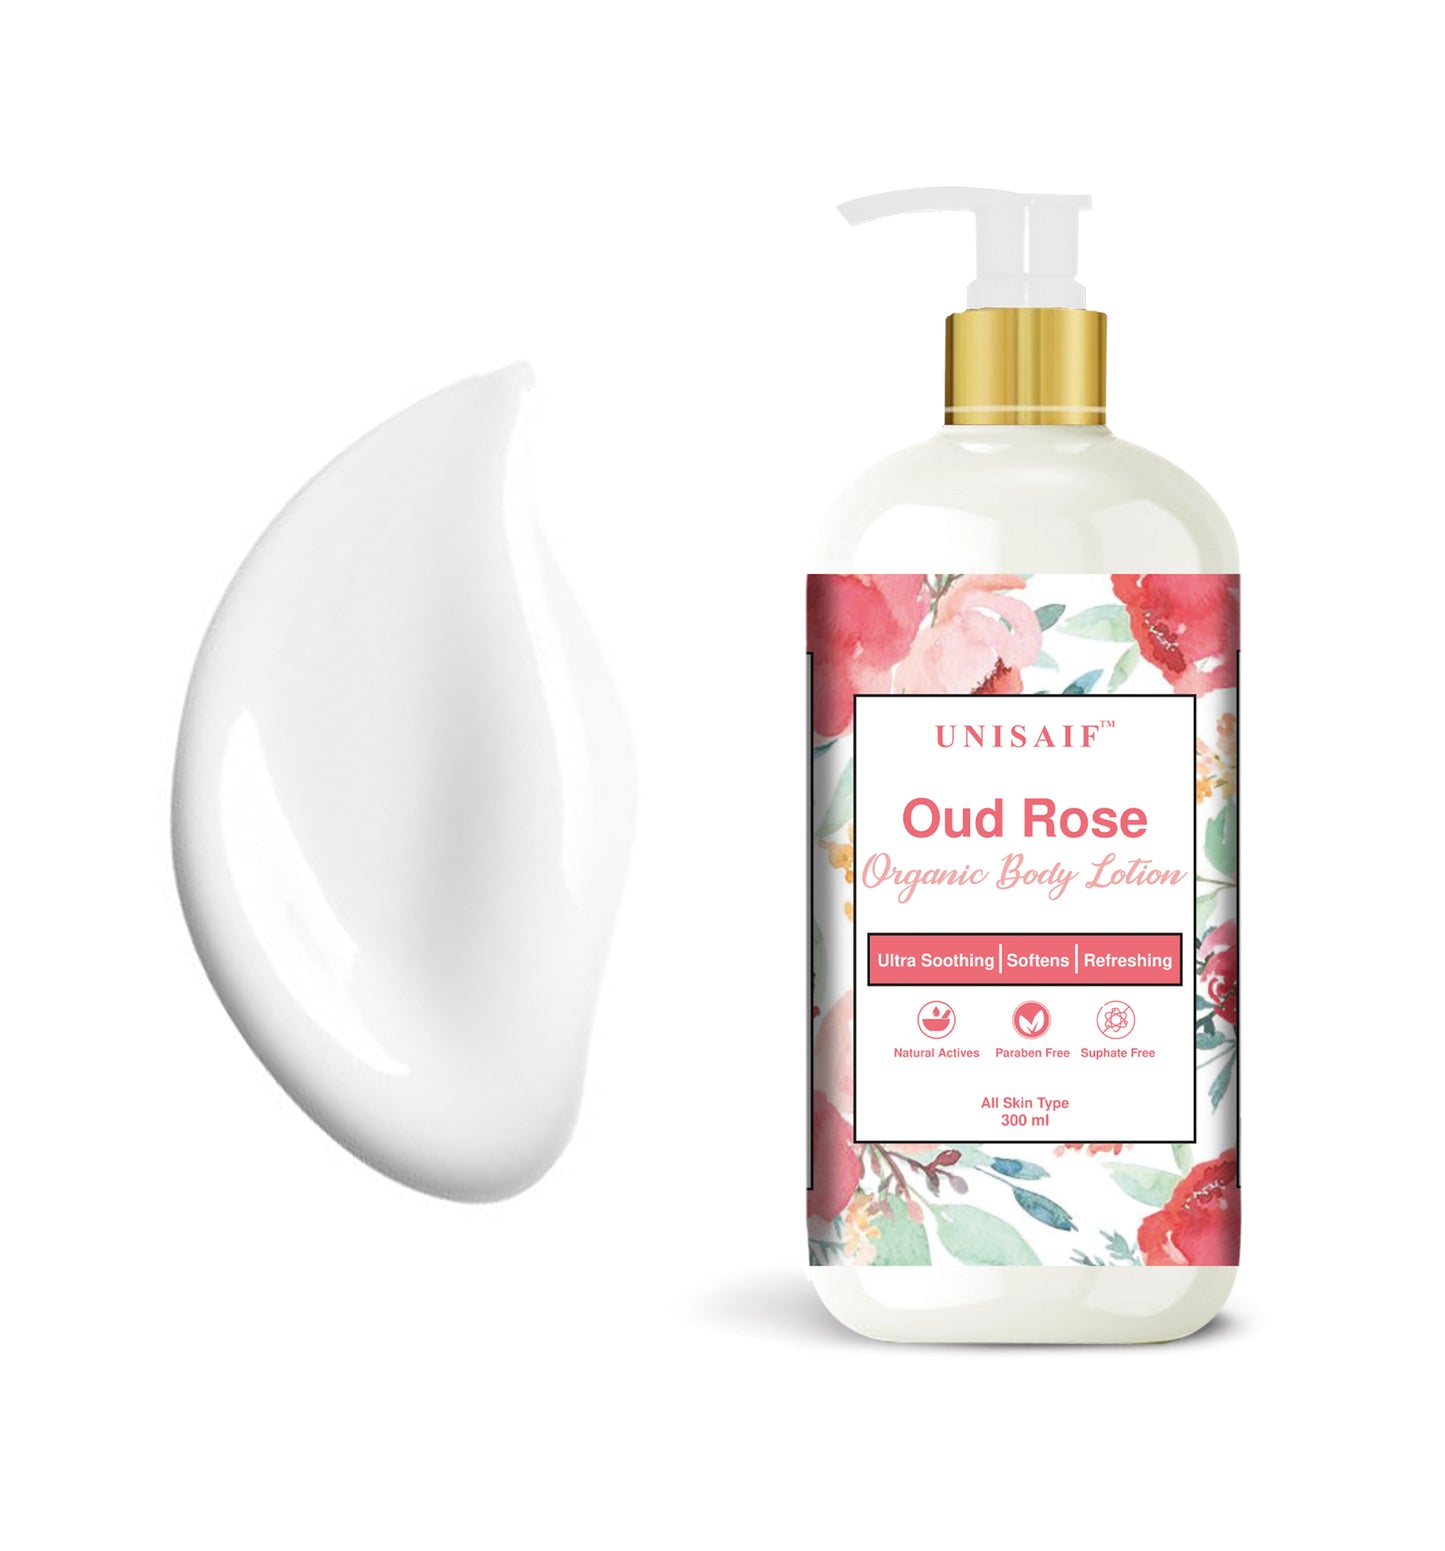 Oud Rose Body Lotion 300ml